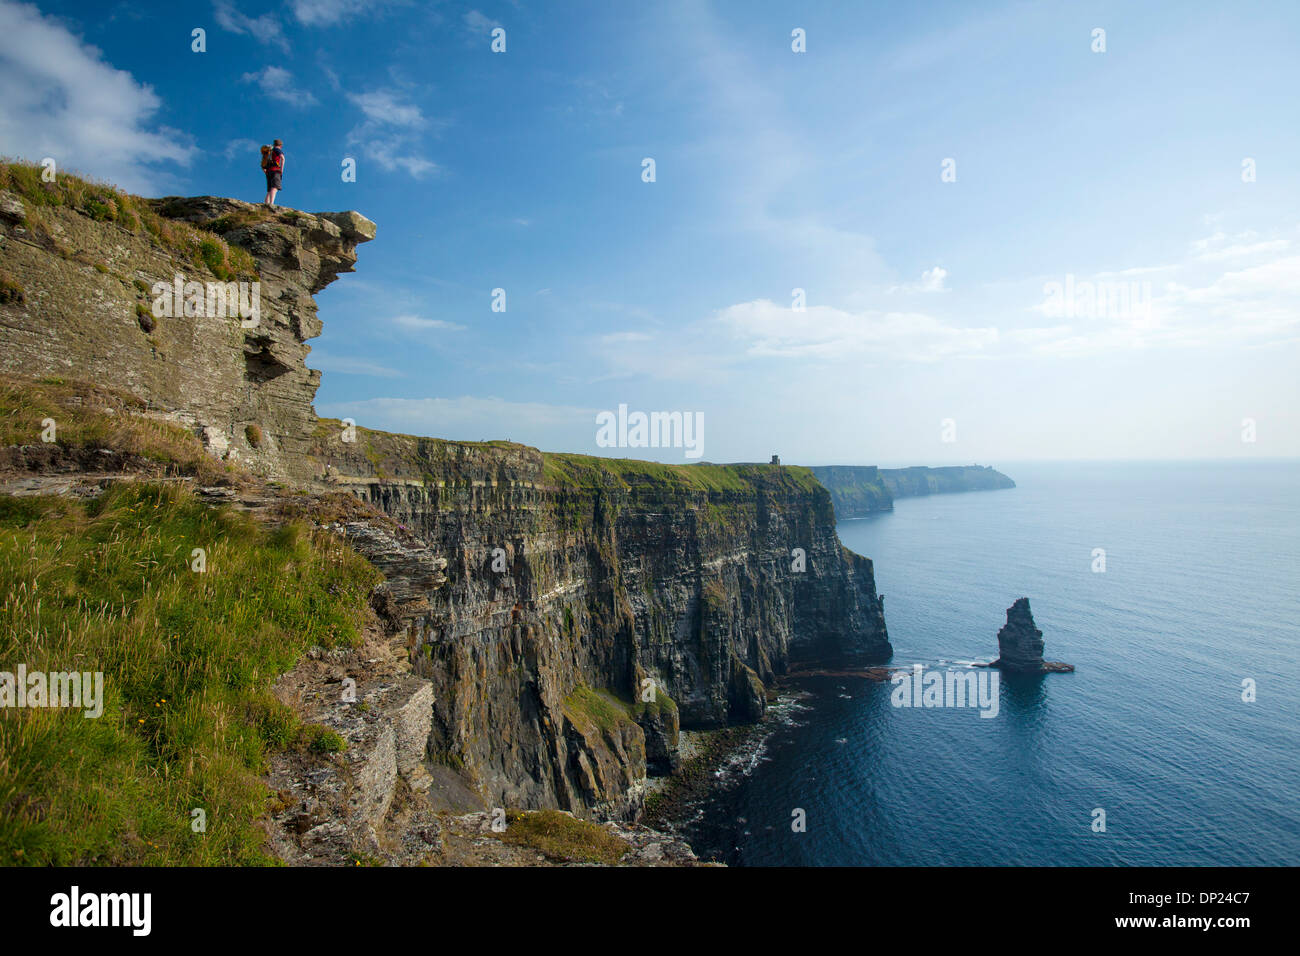 Walker on the Cliffs of Moher Coastal Path, County Clare, Ireland. Stock Photo